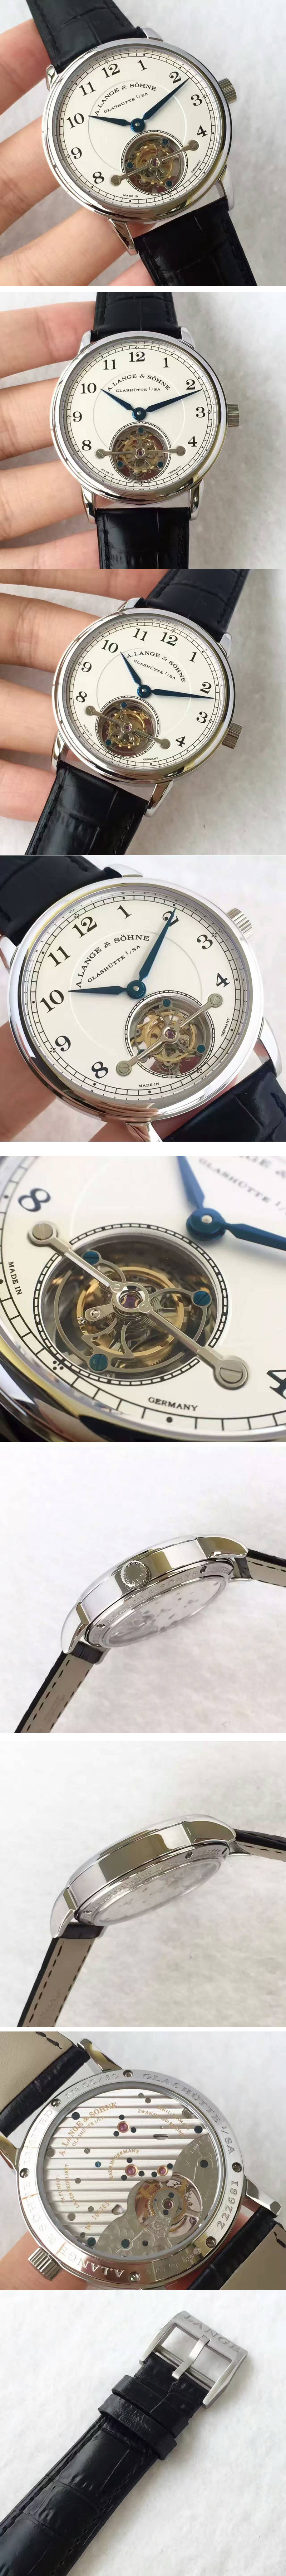 Replica A.Lange & Sohne Watches